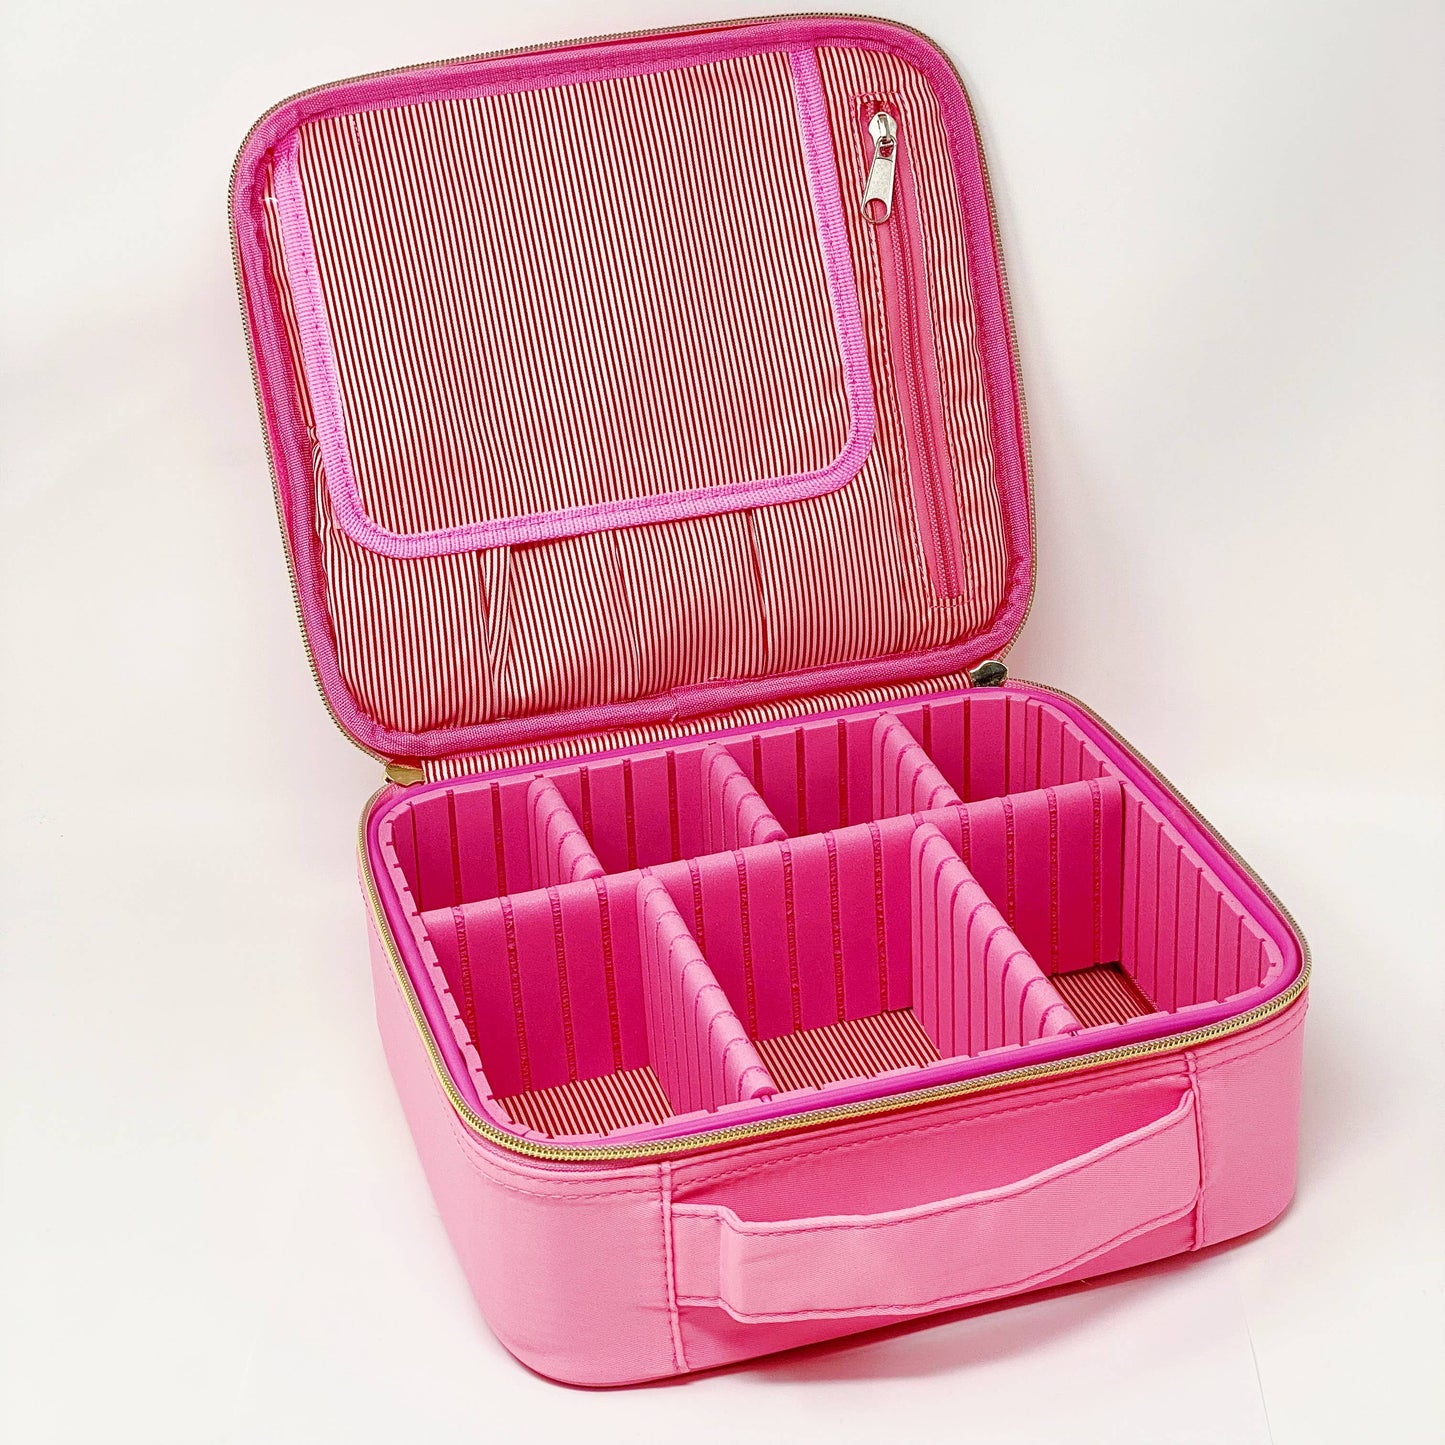 Glam Girl Cosmetic Case: Solid Pink